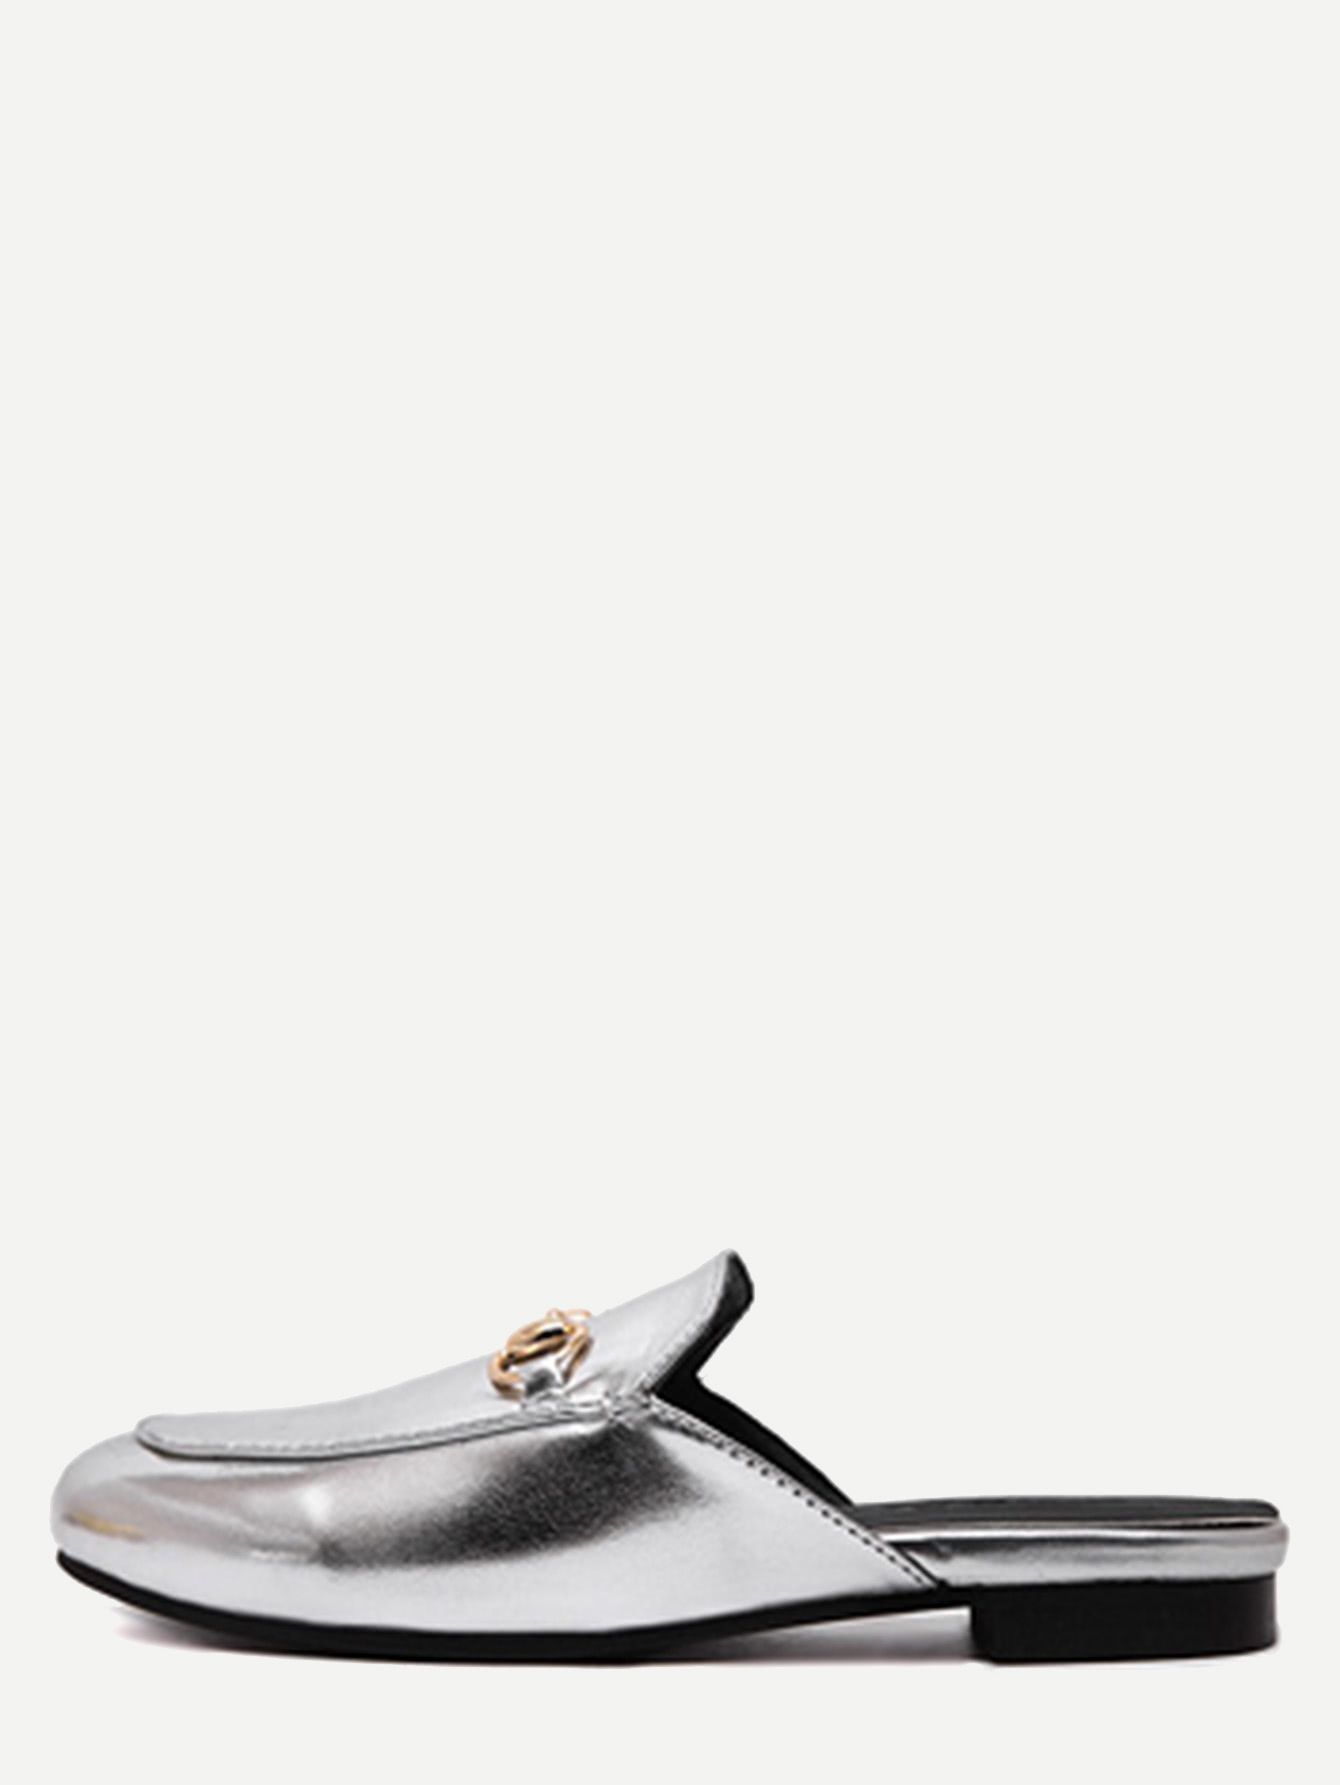 Silver Faux Leather Flat Loafer Slippers | SHEIN